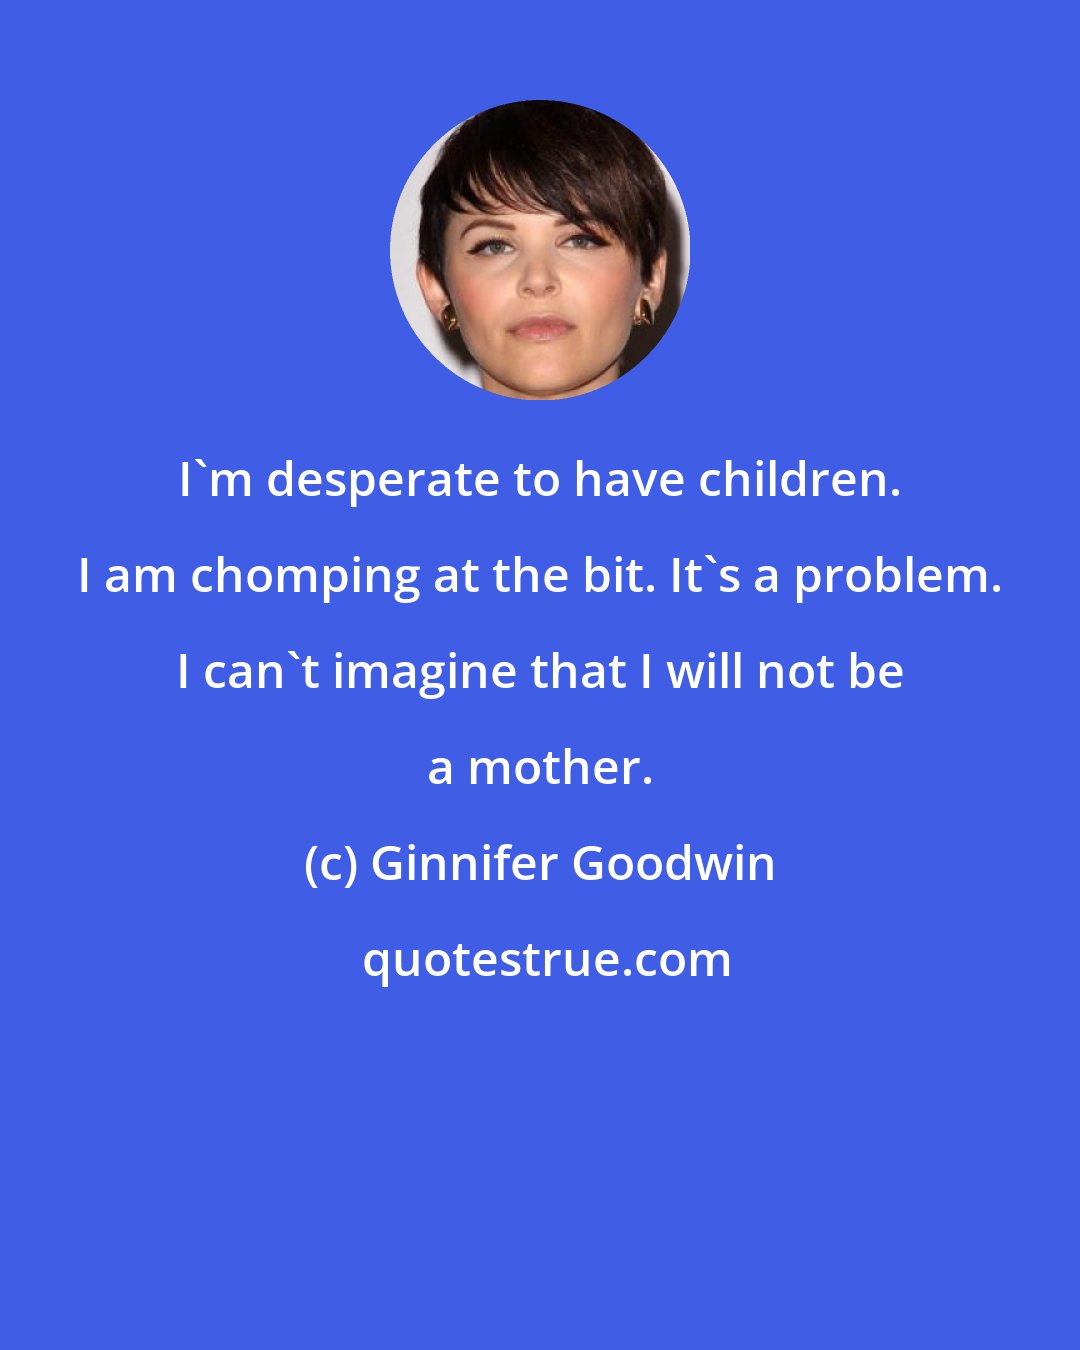 Ginnifer Goodwin: I'm desperate to have children. I am chomping at the bit. It's a problem. I can't imagine that I will not be a mother.